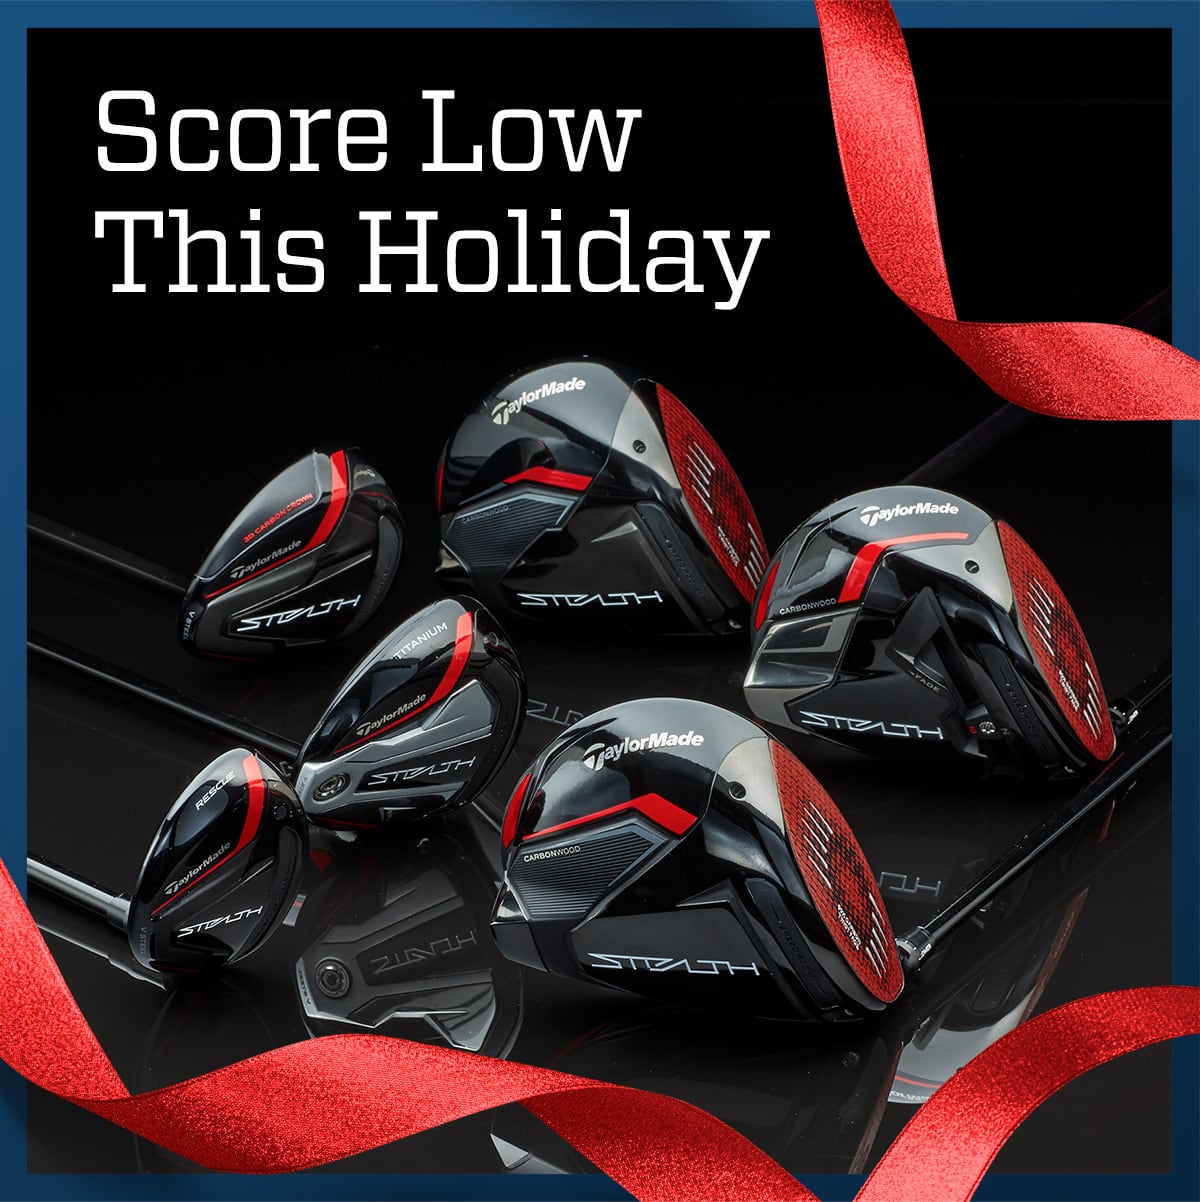 Score low this holiday.